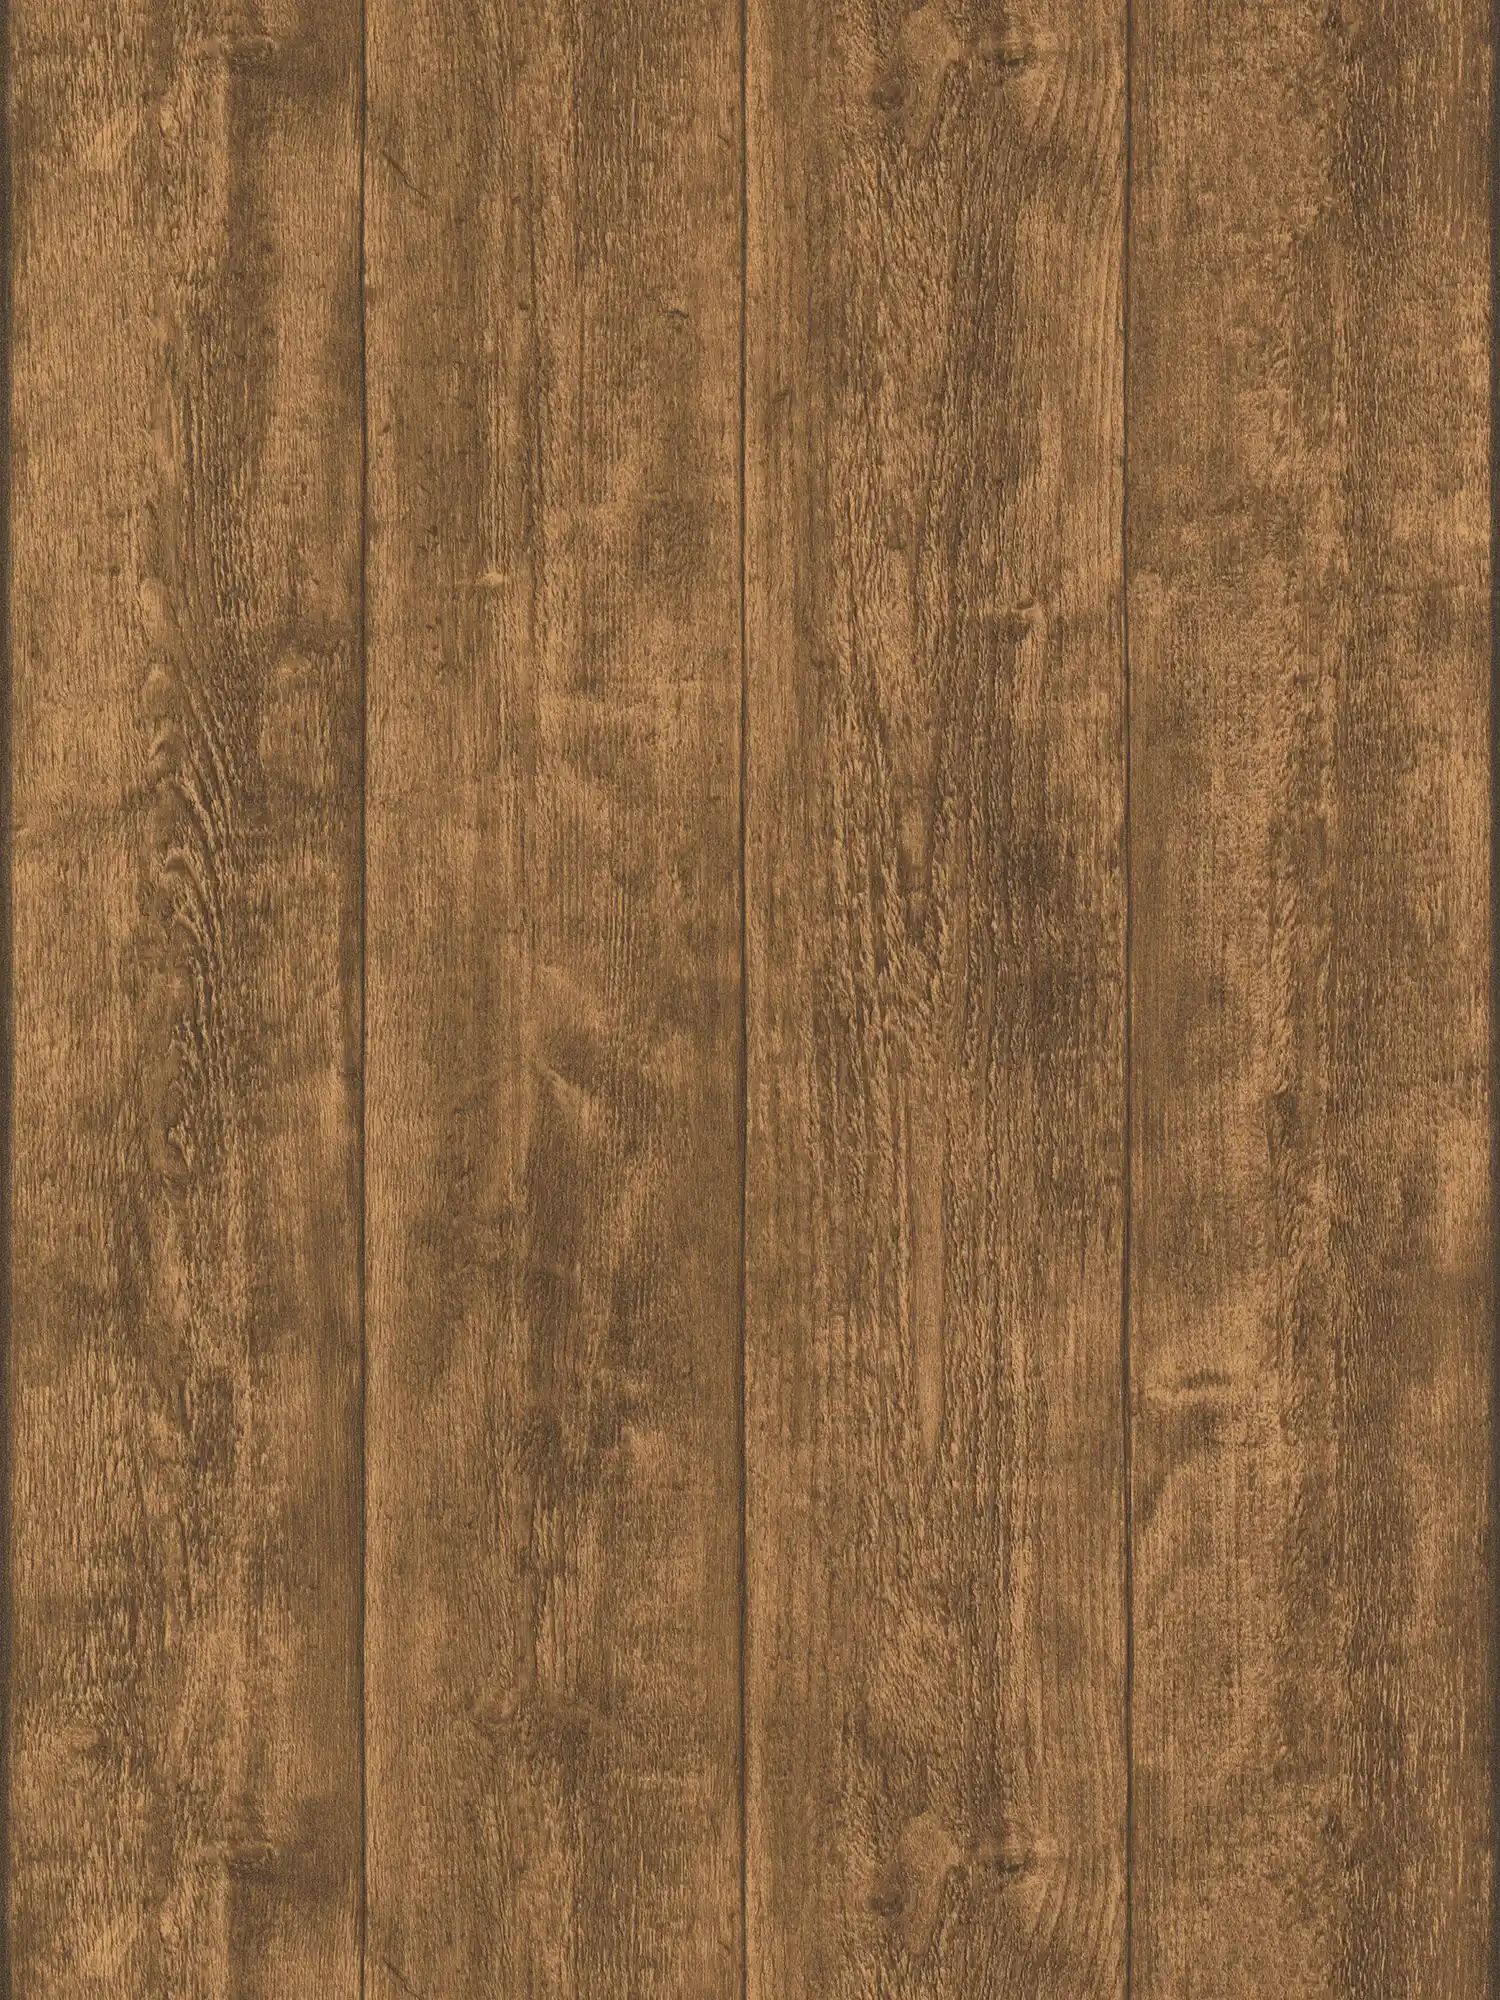         Wood look non-woven wallpaper with rustic grain - brown
    